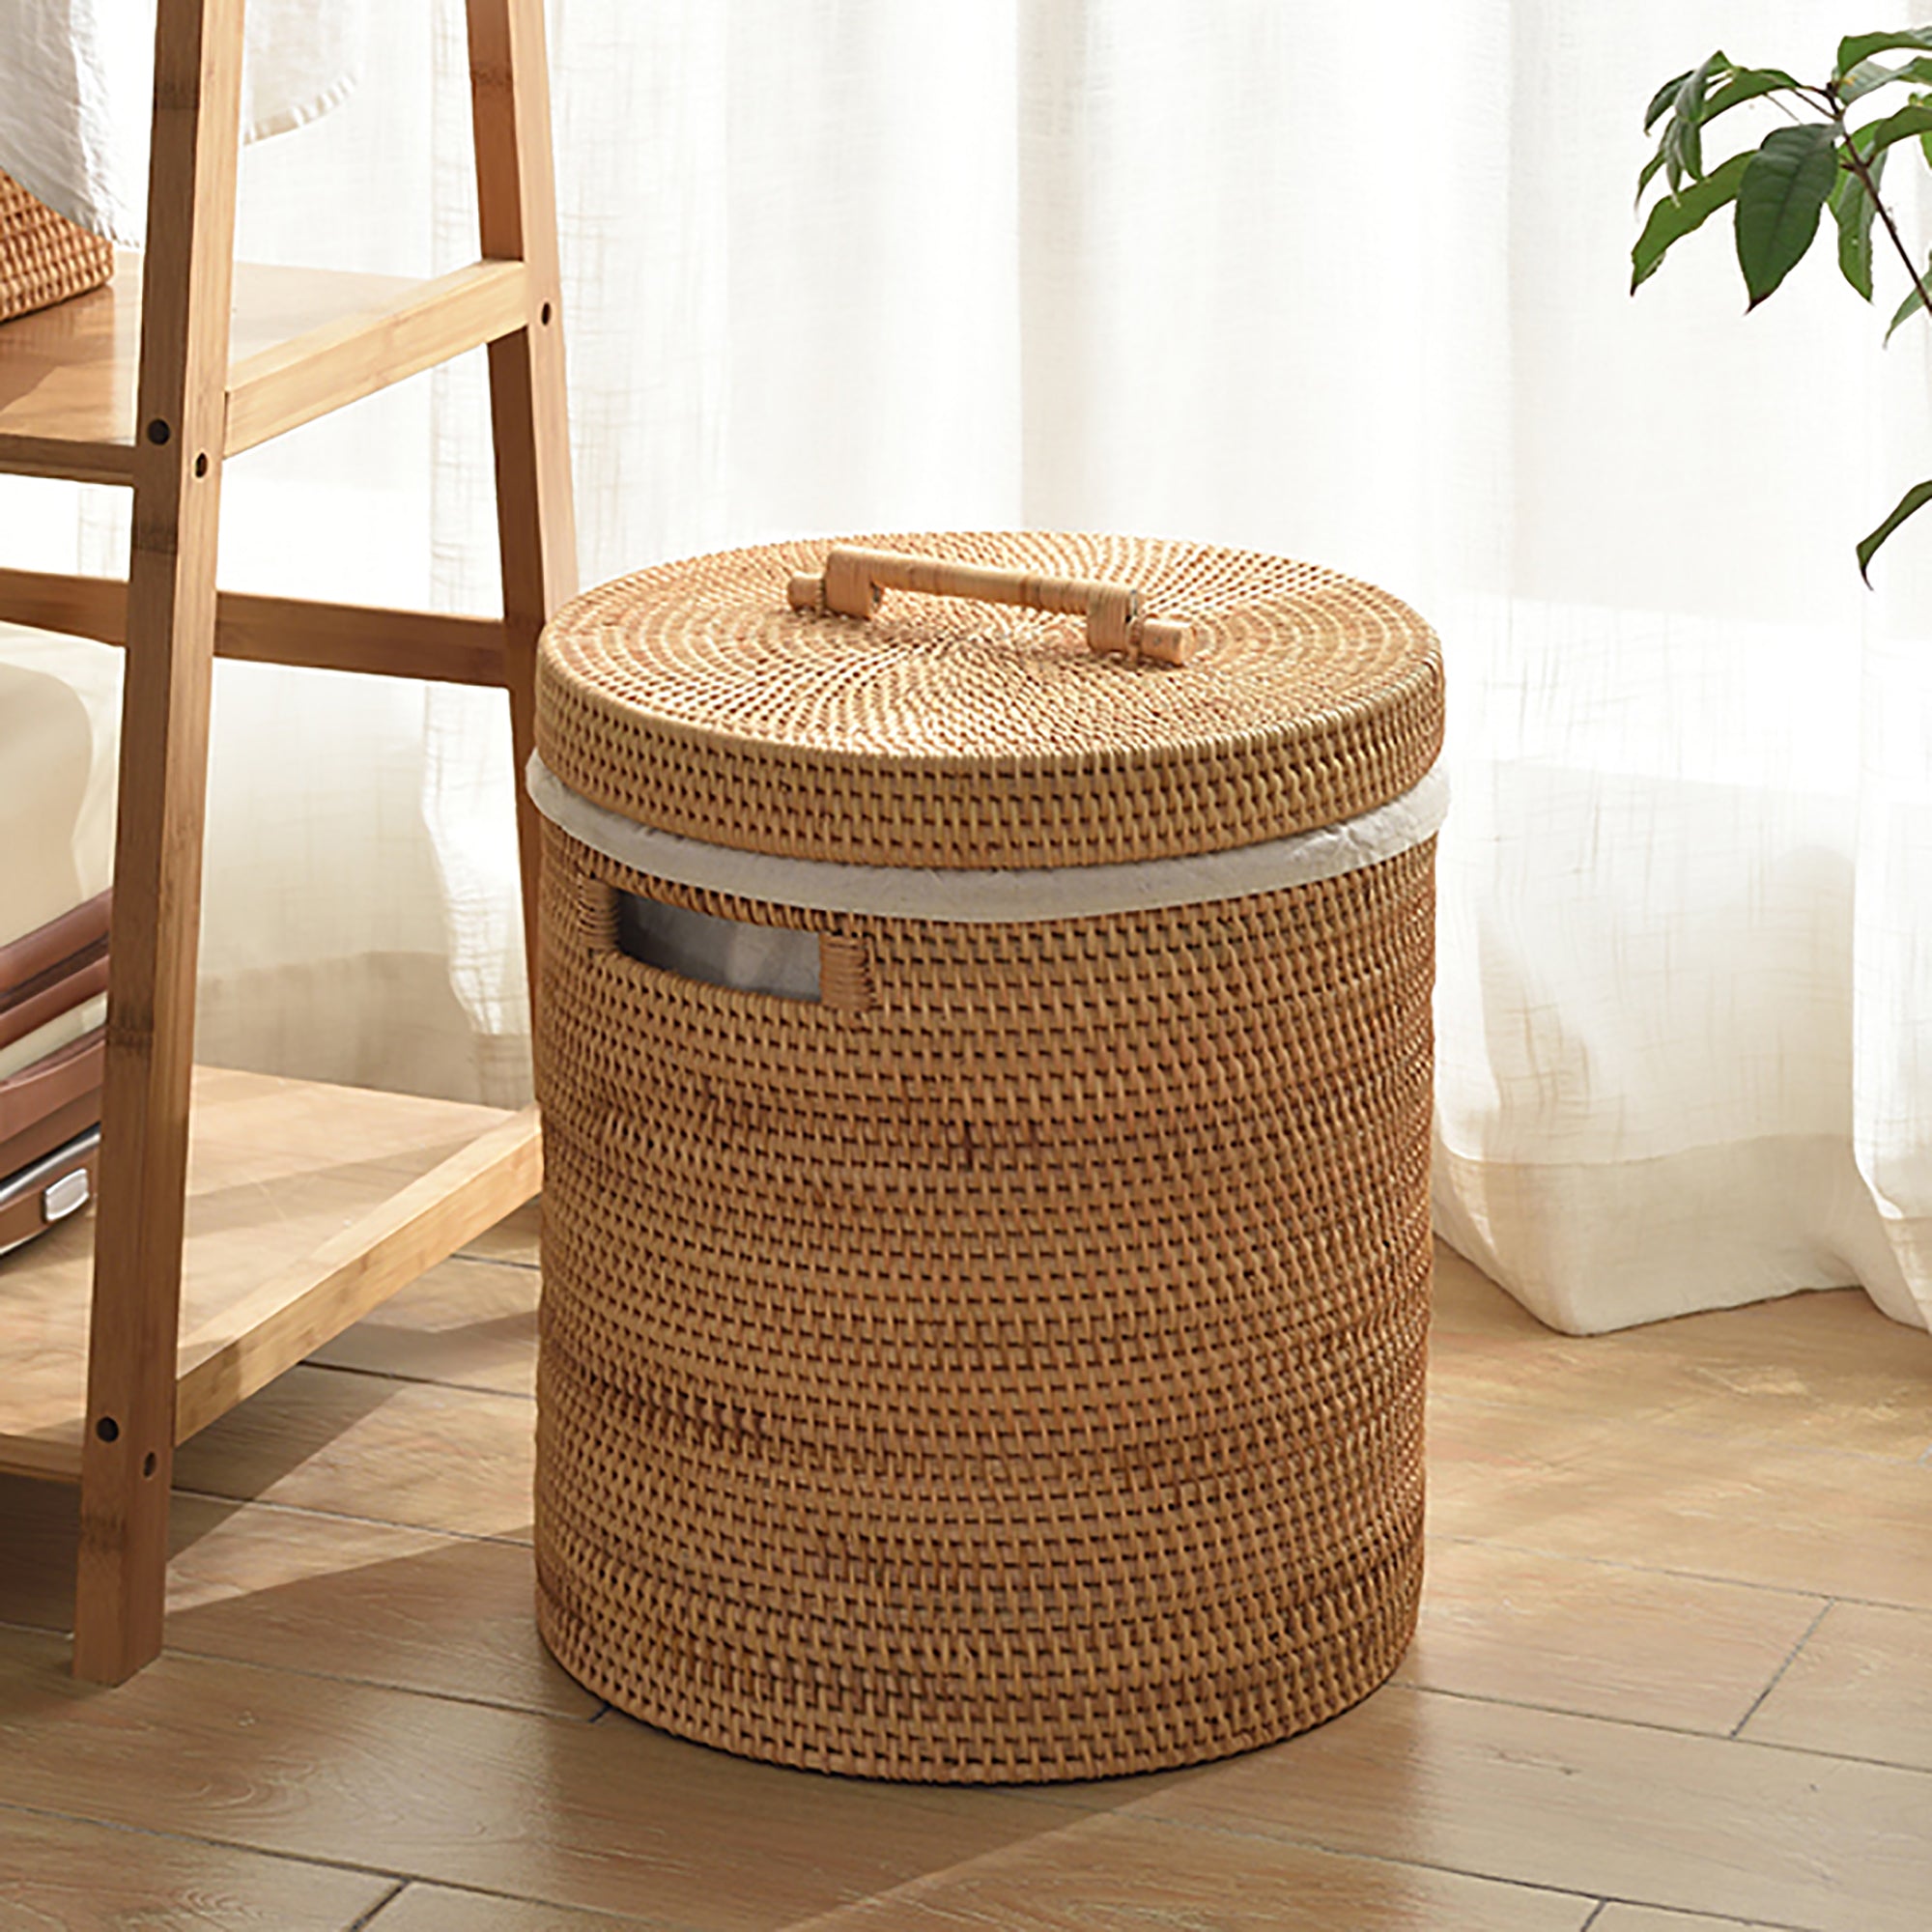 Rattan Laundry Hamper with Lid - Large